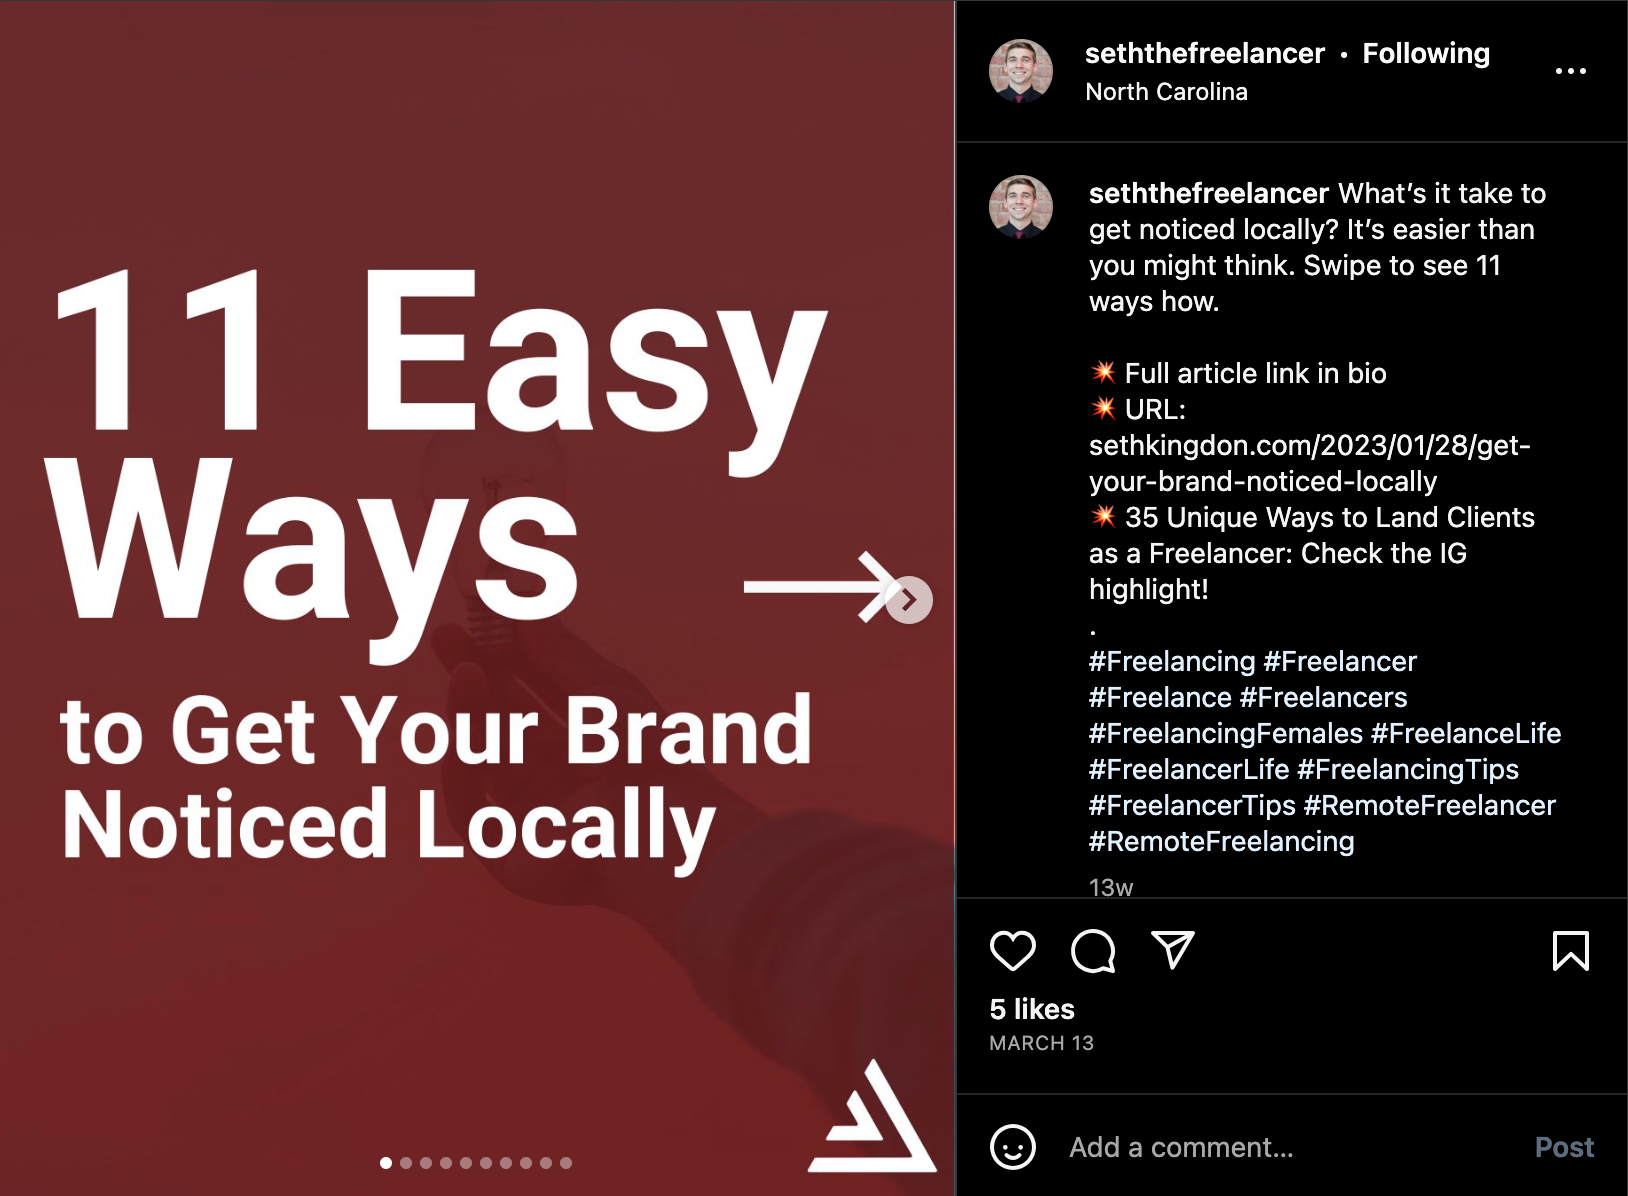 Instagram post telling you easy ways to get your brand noticed locally